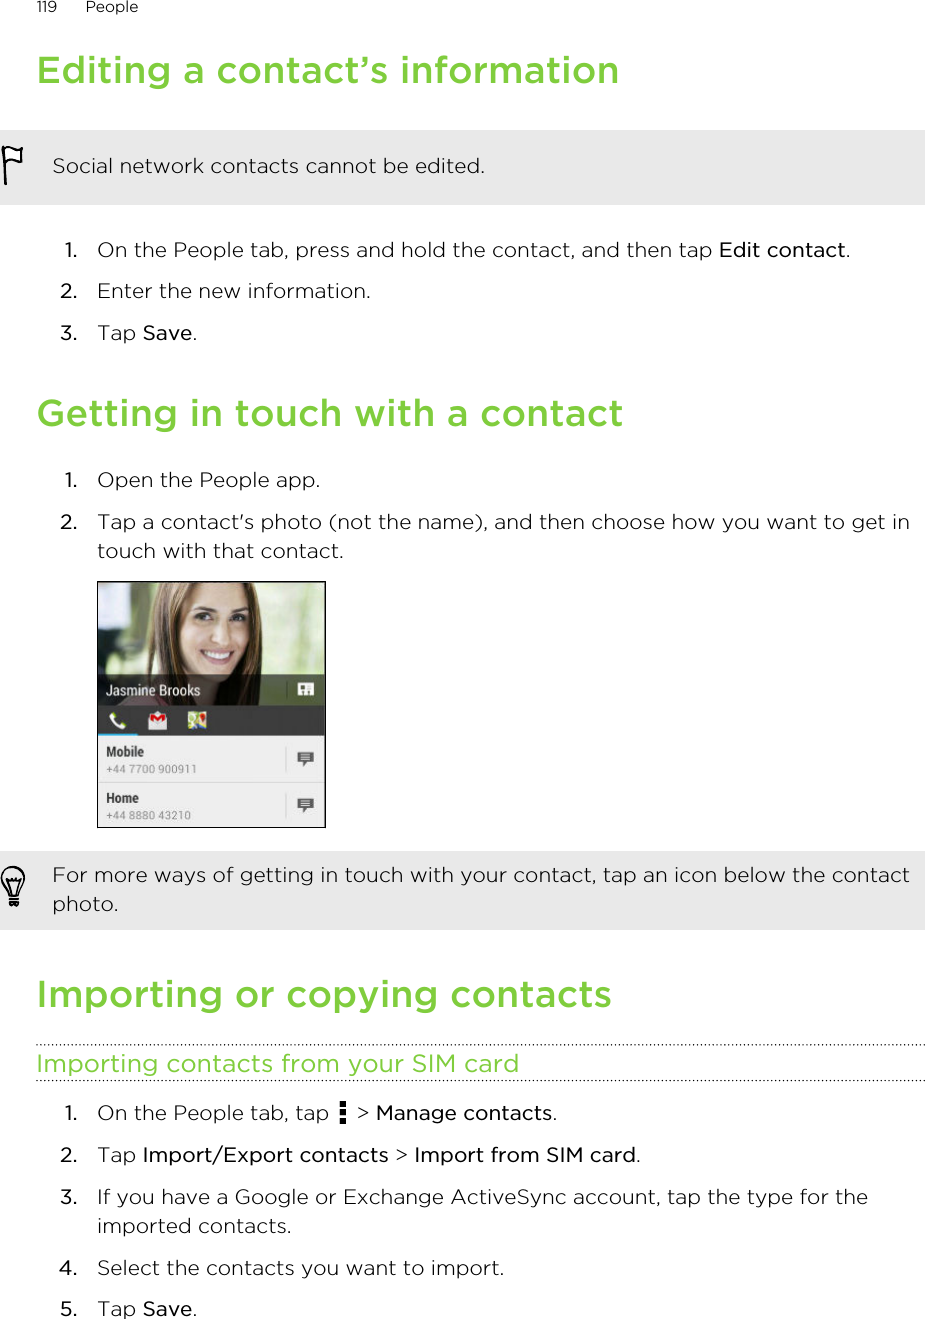 Editing a contact’s informationSocial network contacts cannot be edited.1. On the People tab, press and hold the contact, and then tap Edit contact.2. Enter the new information.3. Tap Save.Getting in touch with a contact1. Open the People app.2. Tap a contact&apos;s photo (not the name), and then choose how you want to get intouch with that contact. For more ways of getting in touch with your contact, tap an icon below the contactphoto.Importing or copying contactsImporting contacts from your SIM card1. On the People tab, tap   &gt; Manage contacts.2. Tap Import/Export contacts &gt; Import from SIM card.3. If you have a Google or Exchange ActiveSync account, tap the type for theimported contacts.4. Select the contacts you want to import.5. Tap Save.119 People